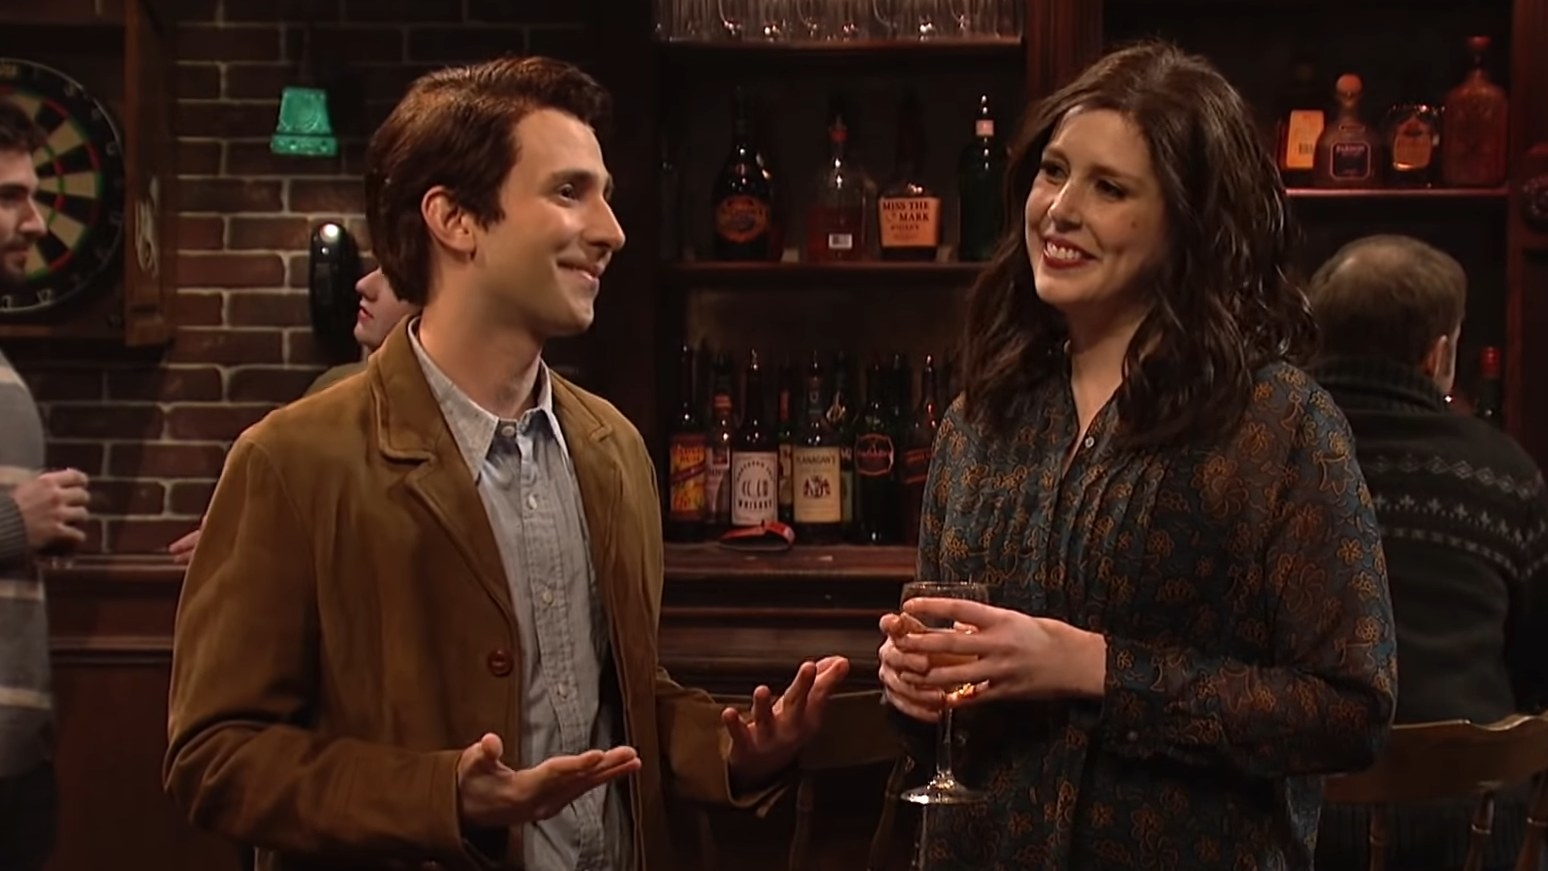 Kyle Mooney&#x27;s character Tony flirting with a woman played by Vanessa Bayer